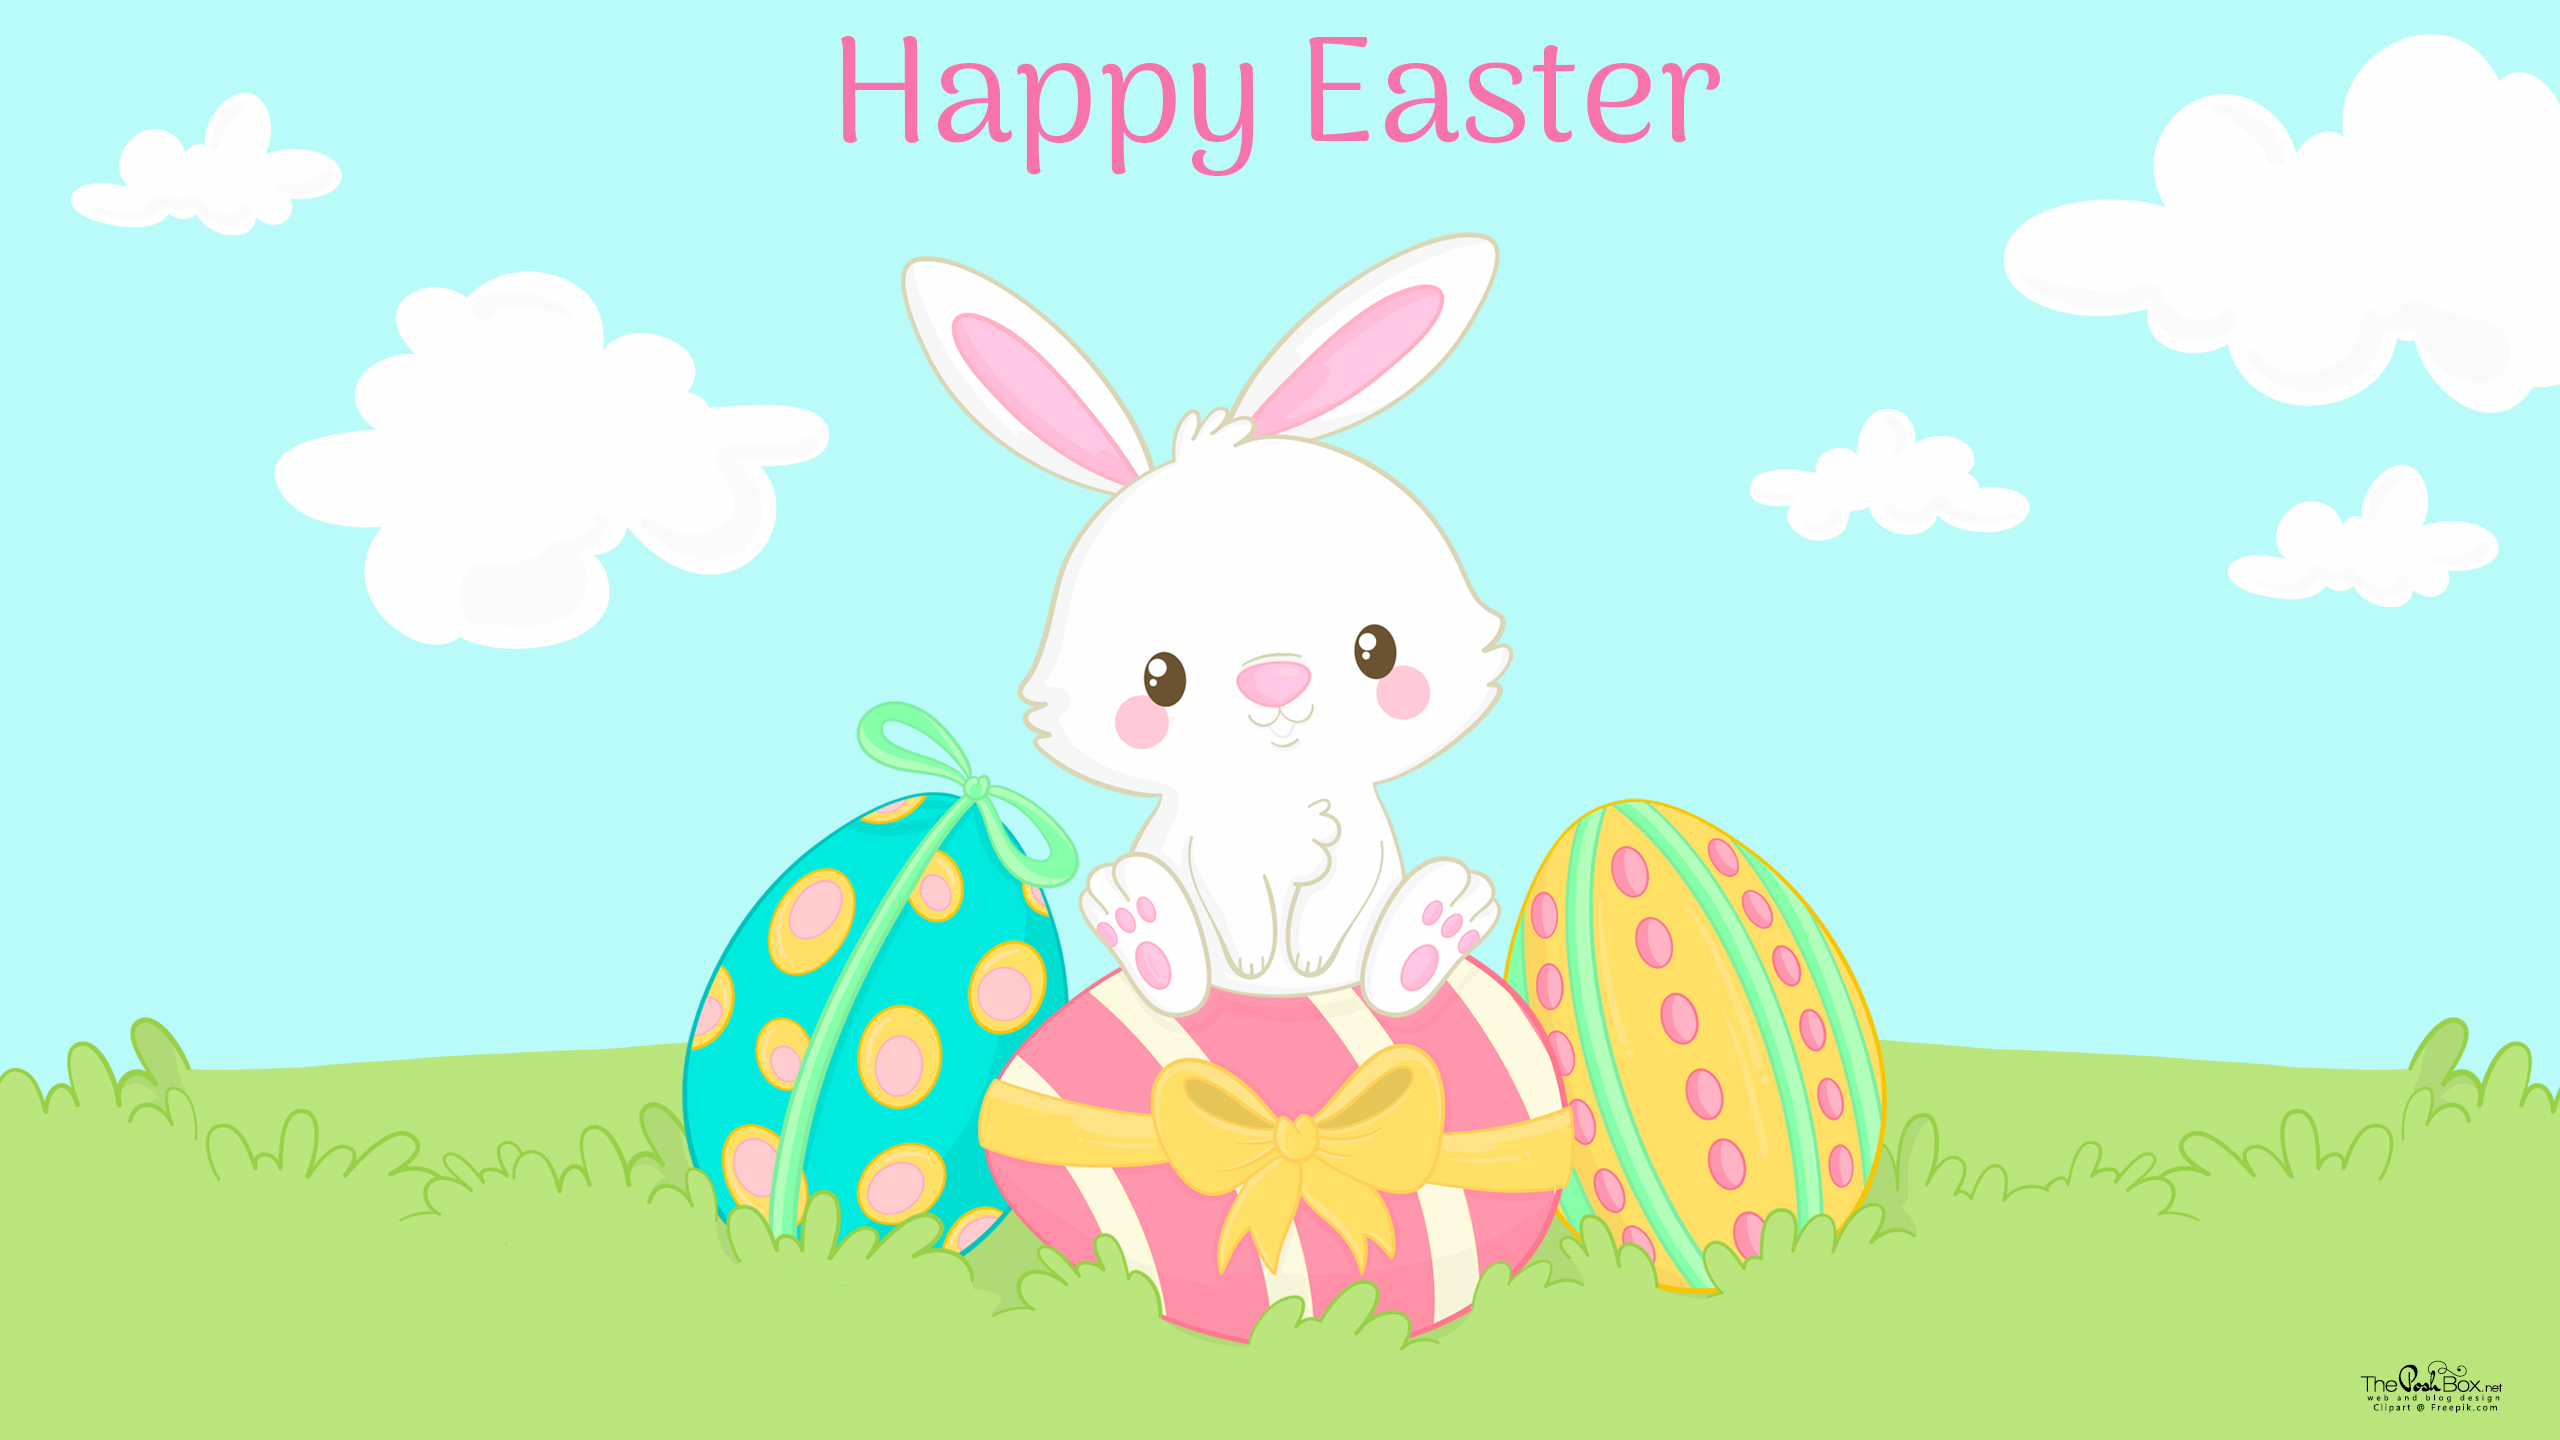 happy easter wallpaper, cartoon, rabbit, rabbits and hares, easter egg, easter bunny, clip art, easter, illustration, hare, graphics